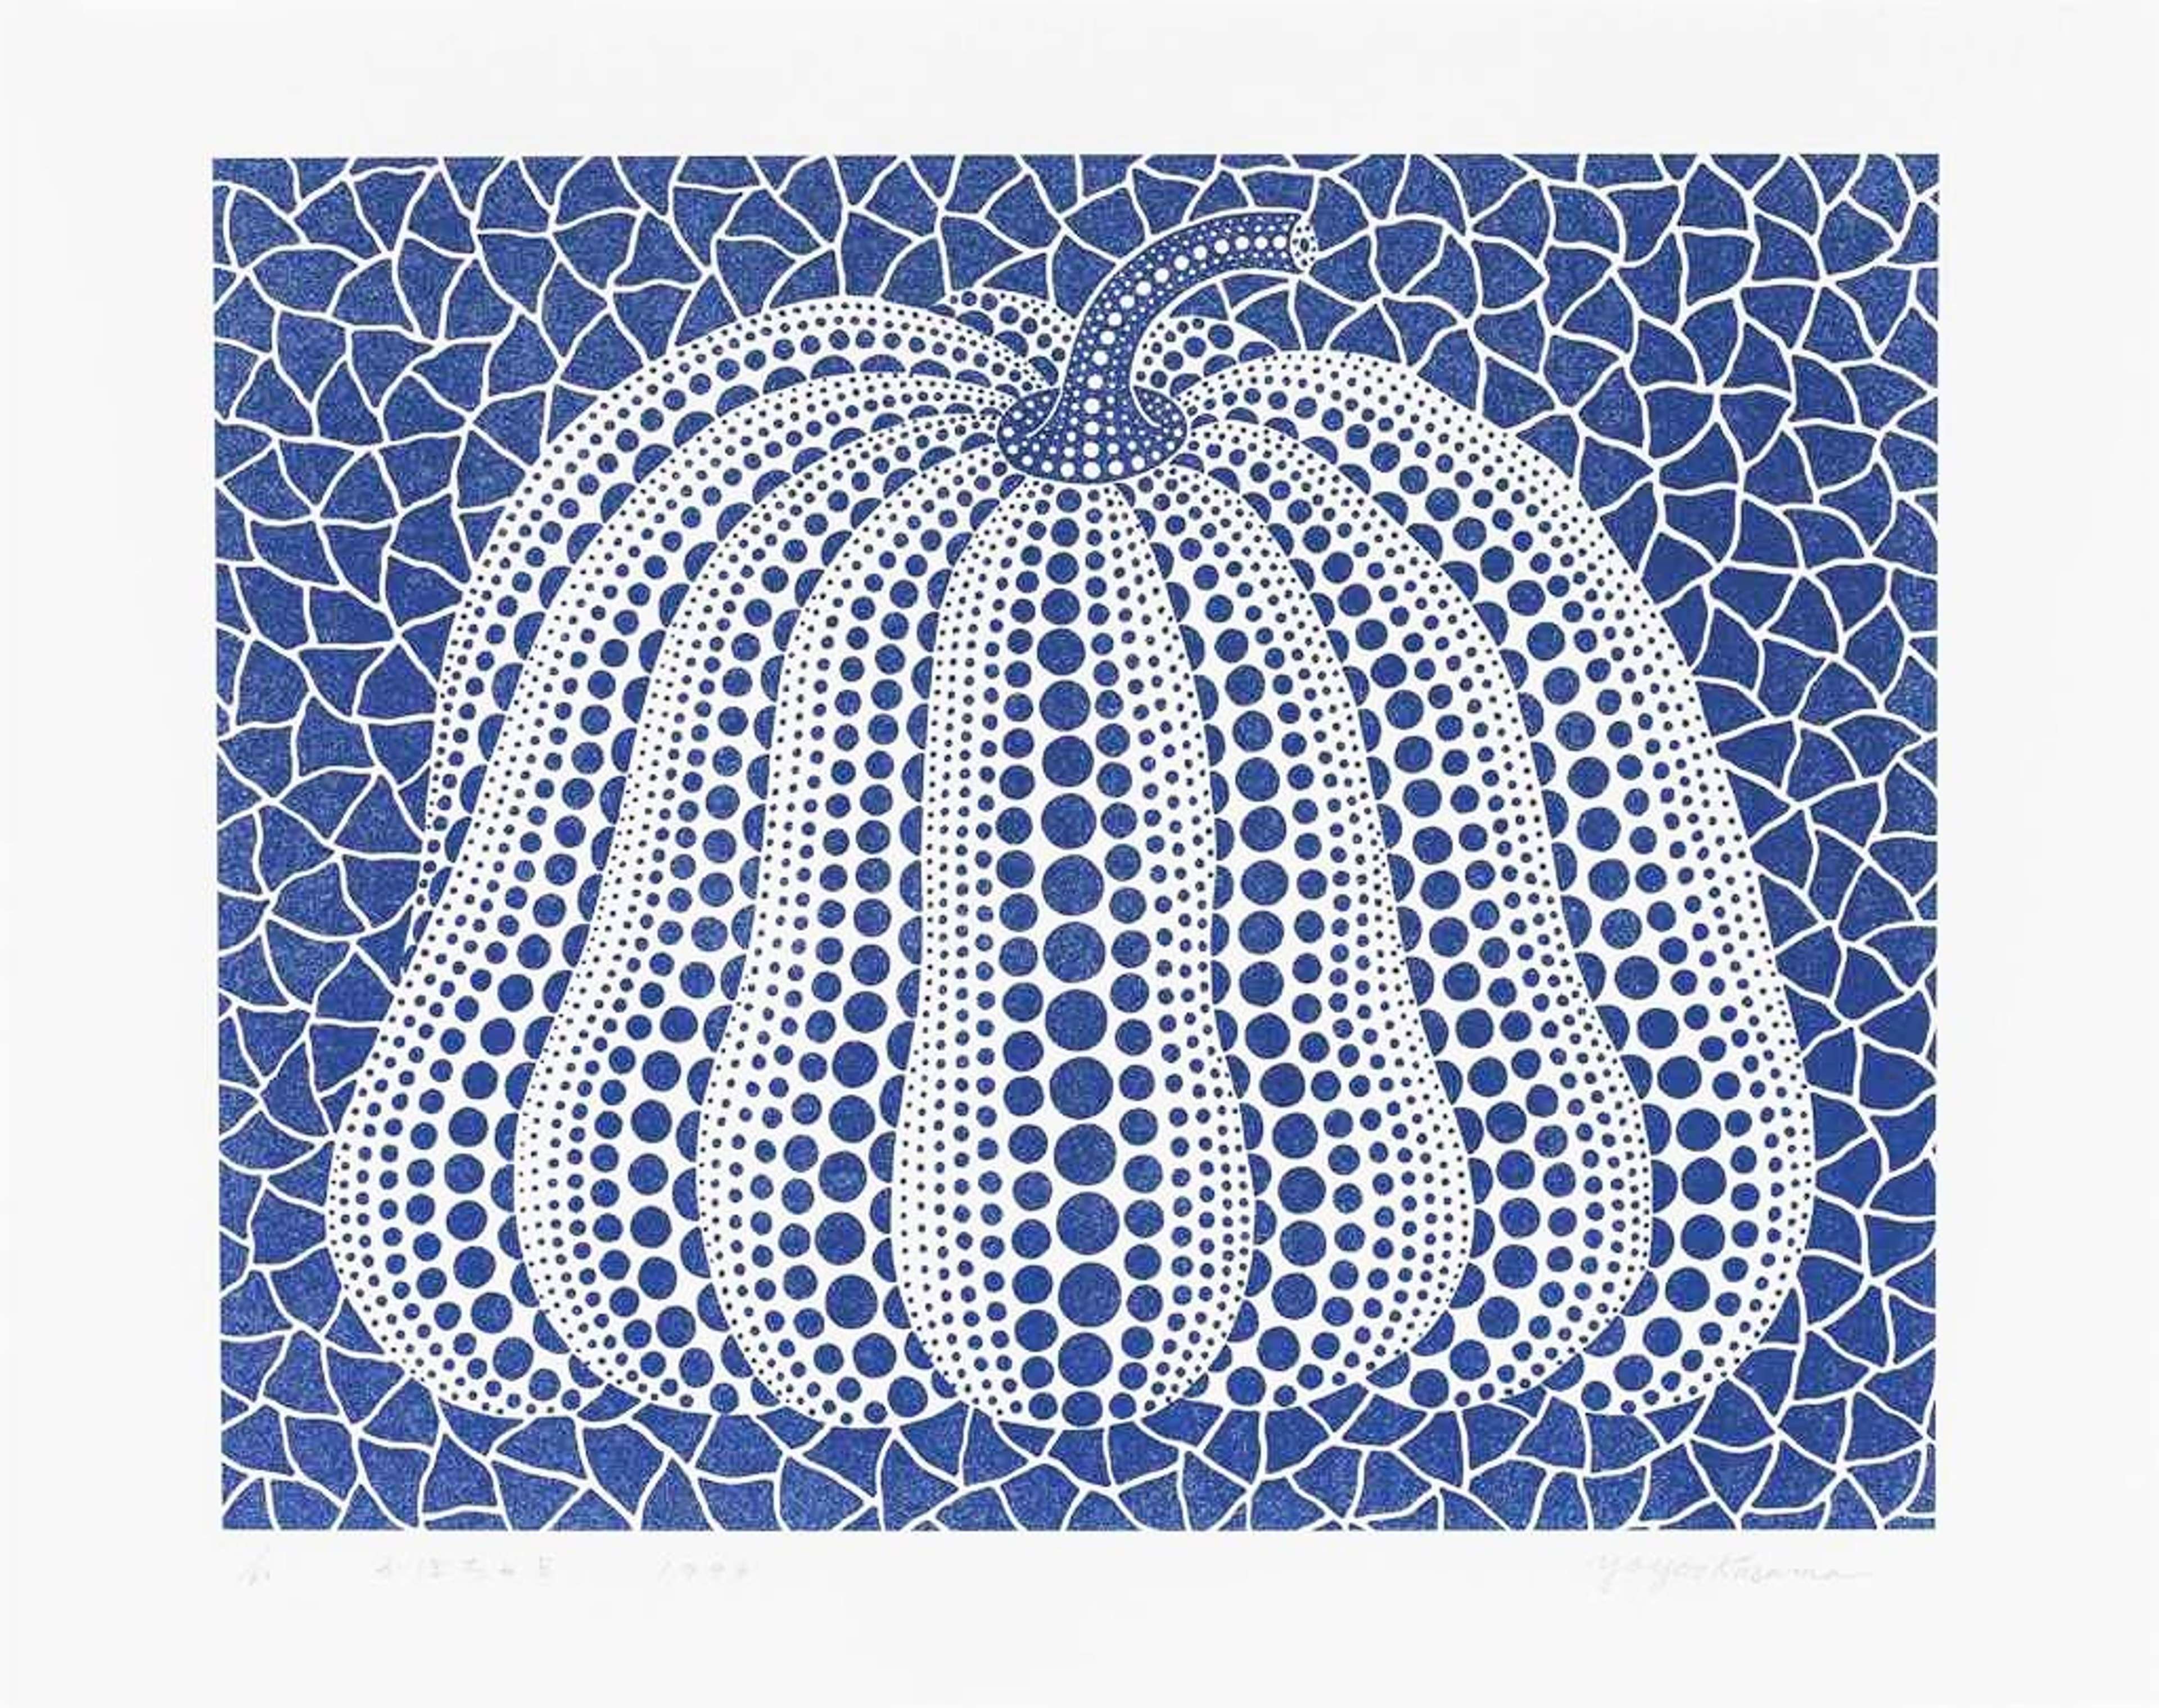  Yayoi Kusama’s Pumpkin (blue). A screenprint of a pumpkin created out of a pattern of blue and white polka dots against a geometric patterned blue background